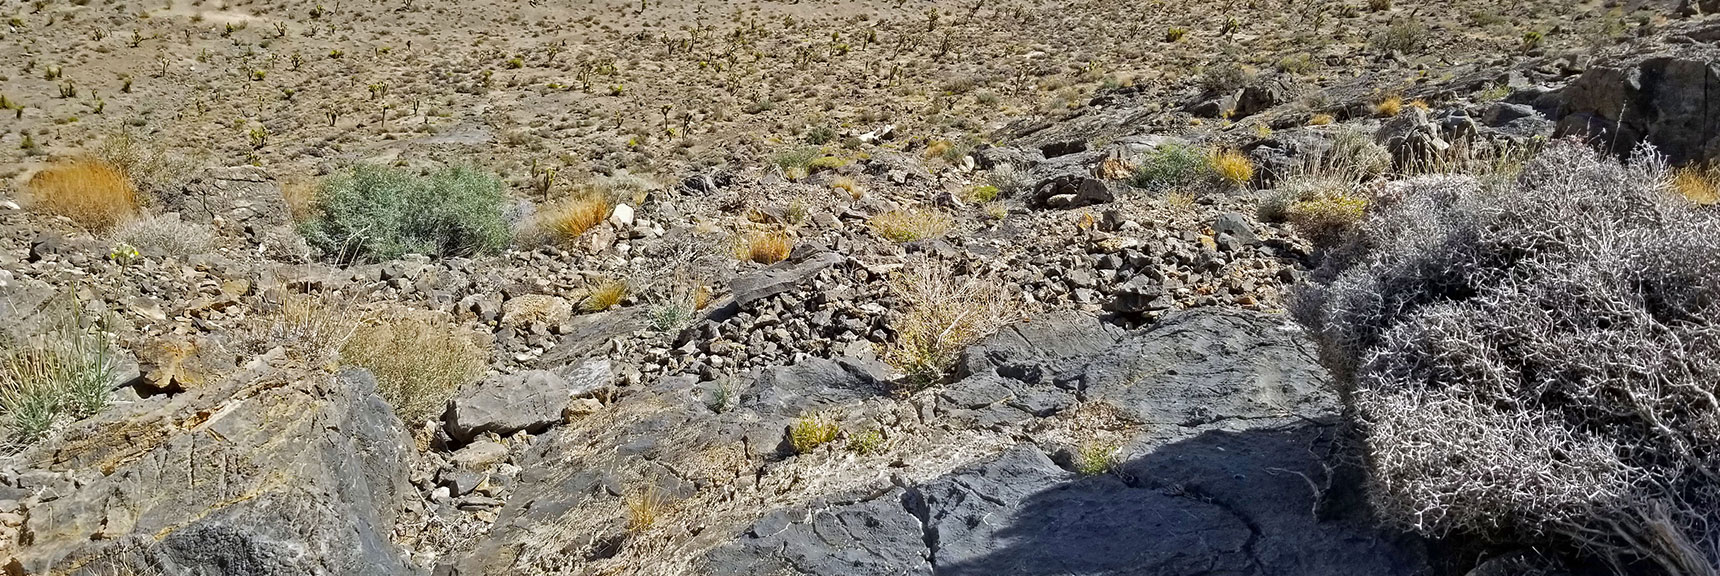 View Back Down Ridge to Valley During Ascent. Steep, But Rocks Have Excellent Traction | Fossil Ridge End to End | Sheep Range | Desert National Wildlife Refuge, Nevada